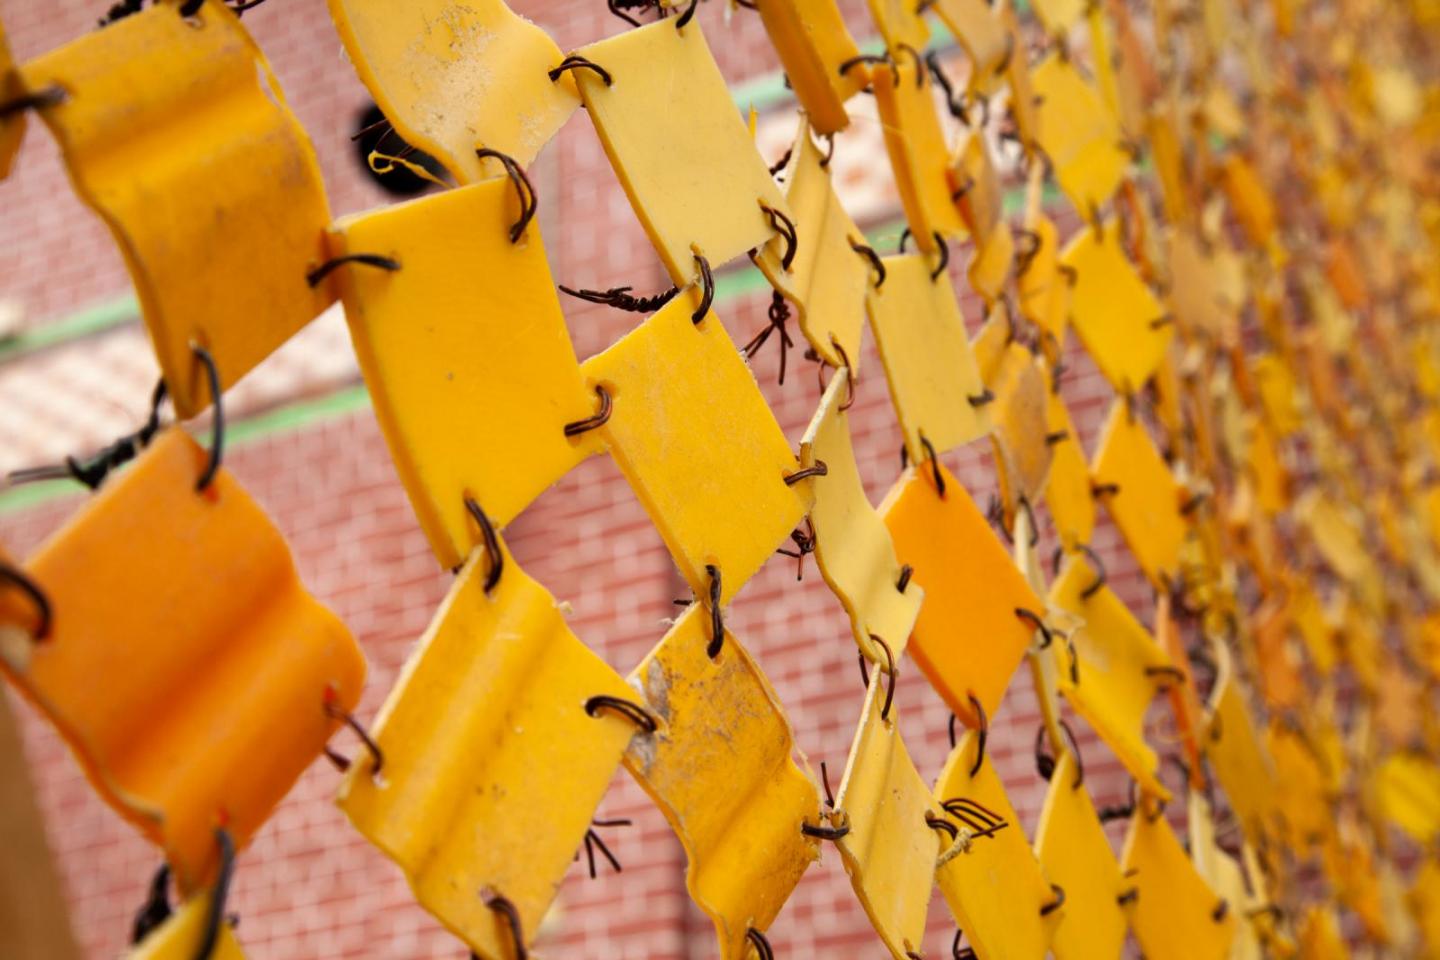 Yellow squares chained together